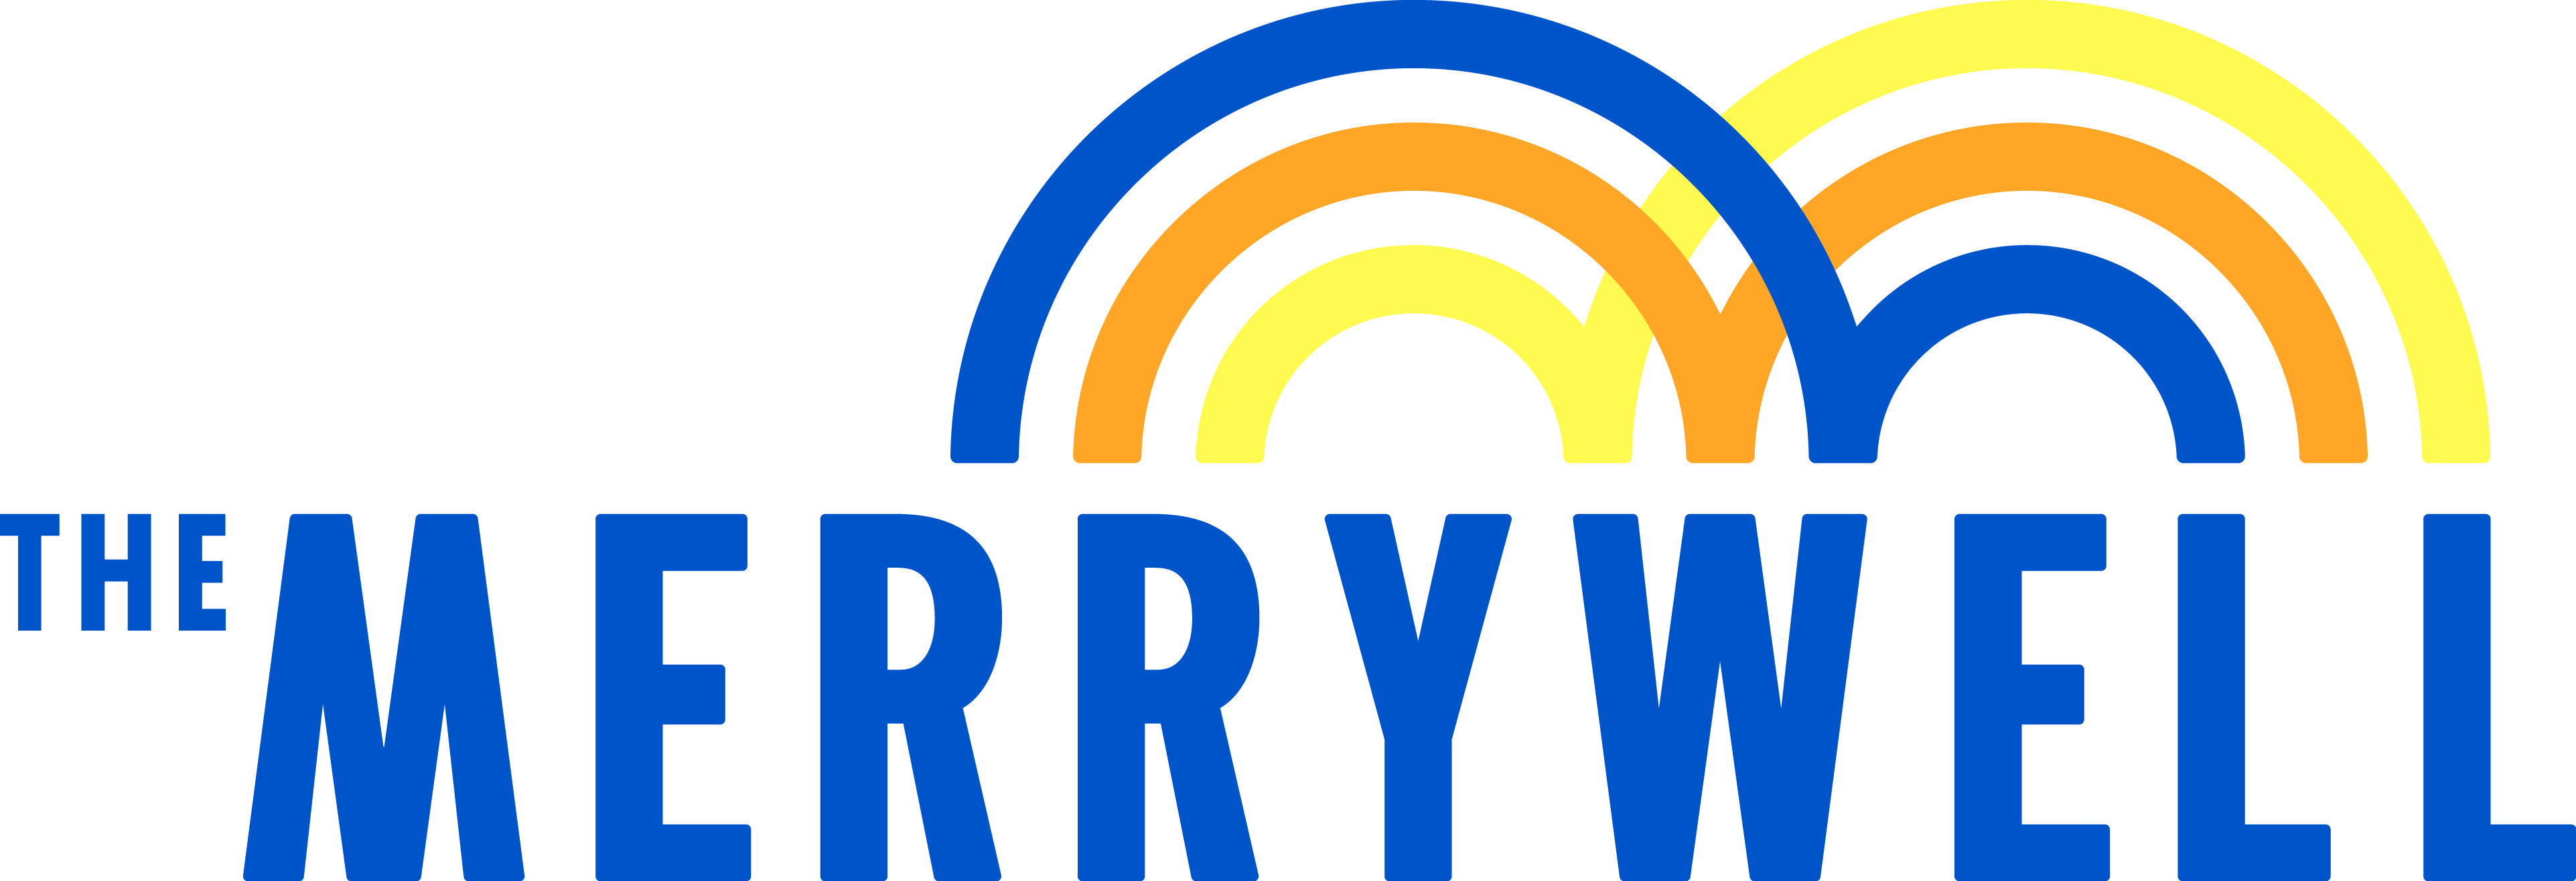 Logo of The Merrywell